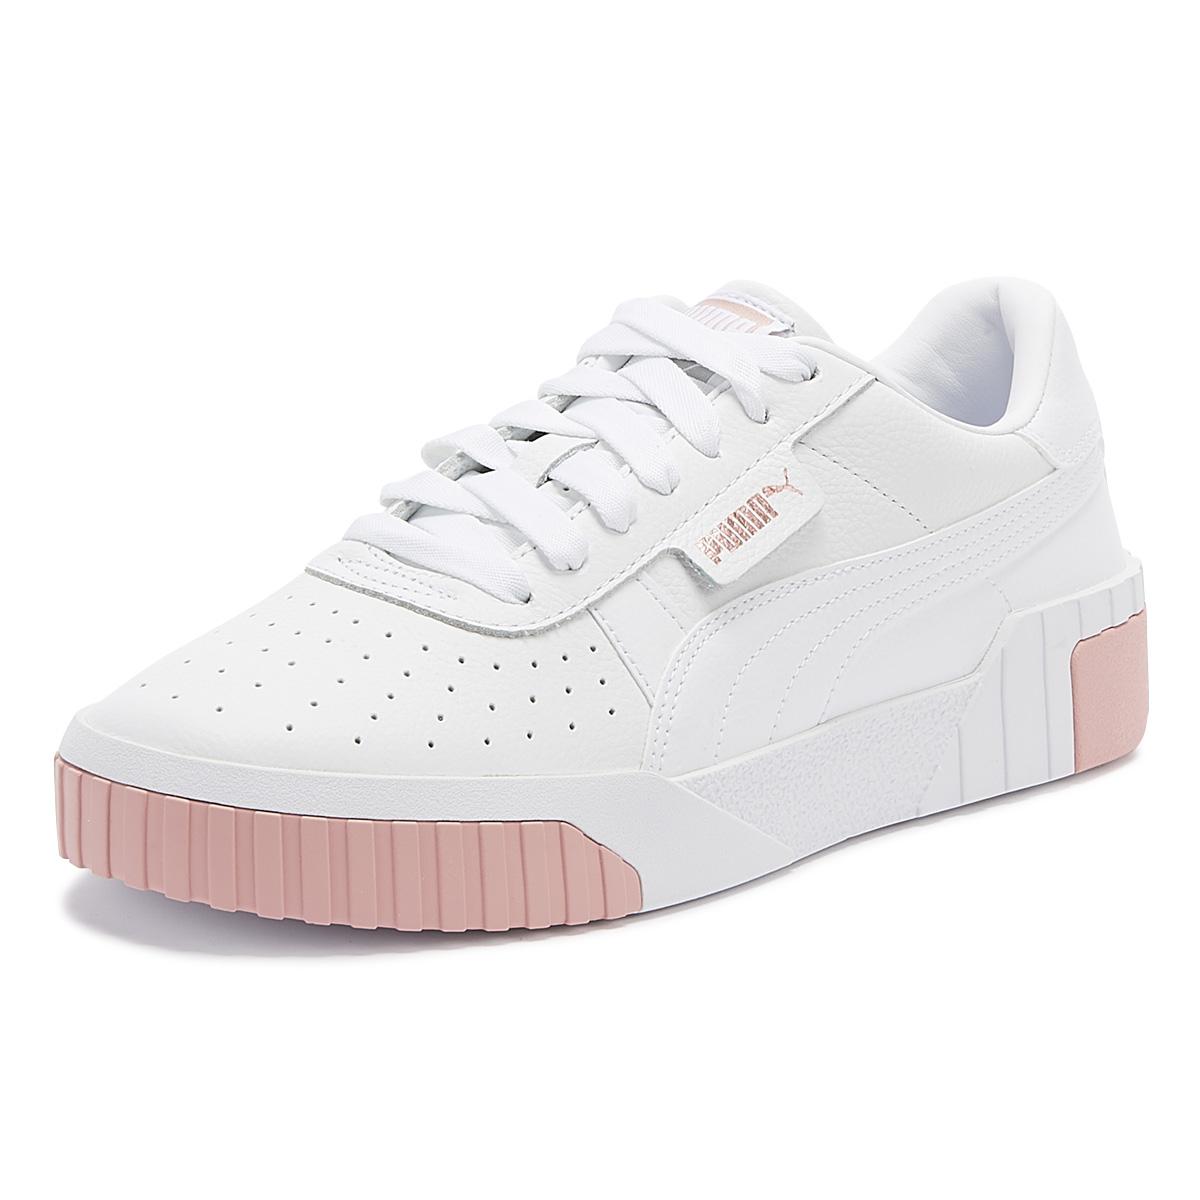 PUMA Rubber Cali Womens White / Rose Gold Trainers - Lyst